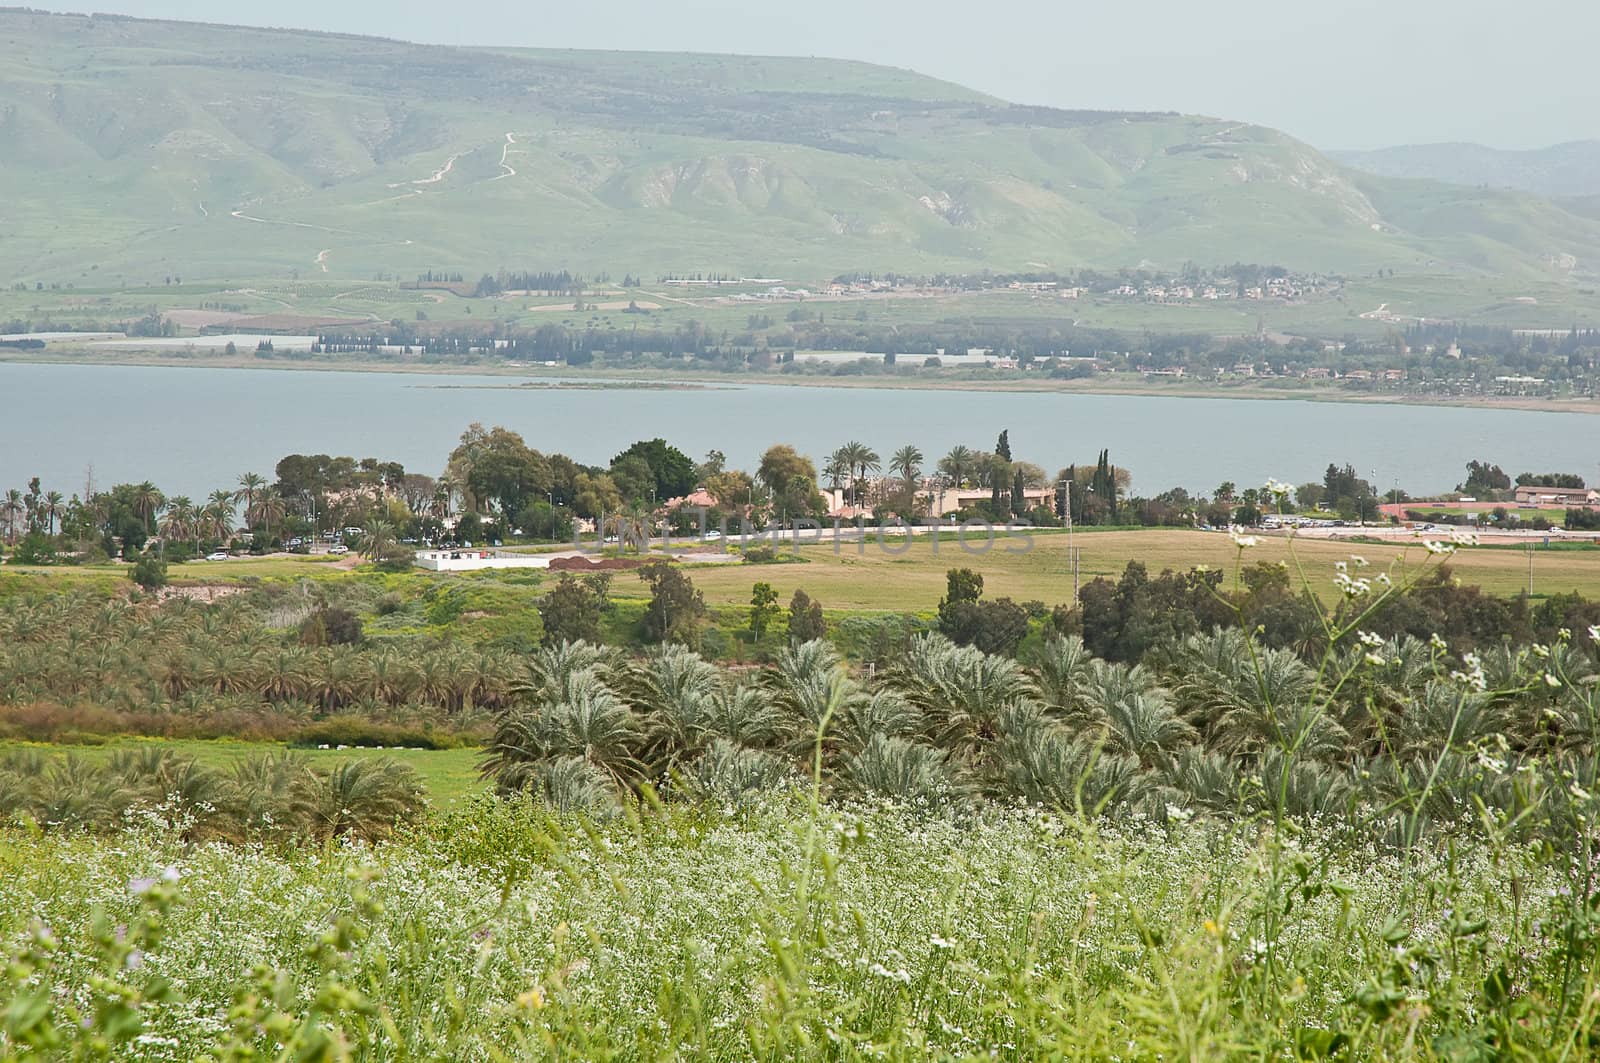  Sea of Galilee 
 by LarisaP